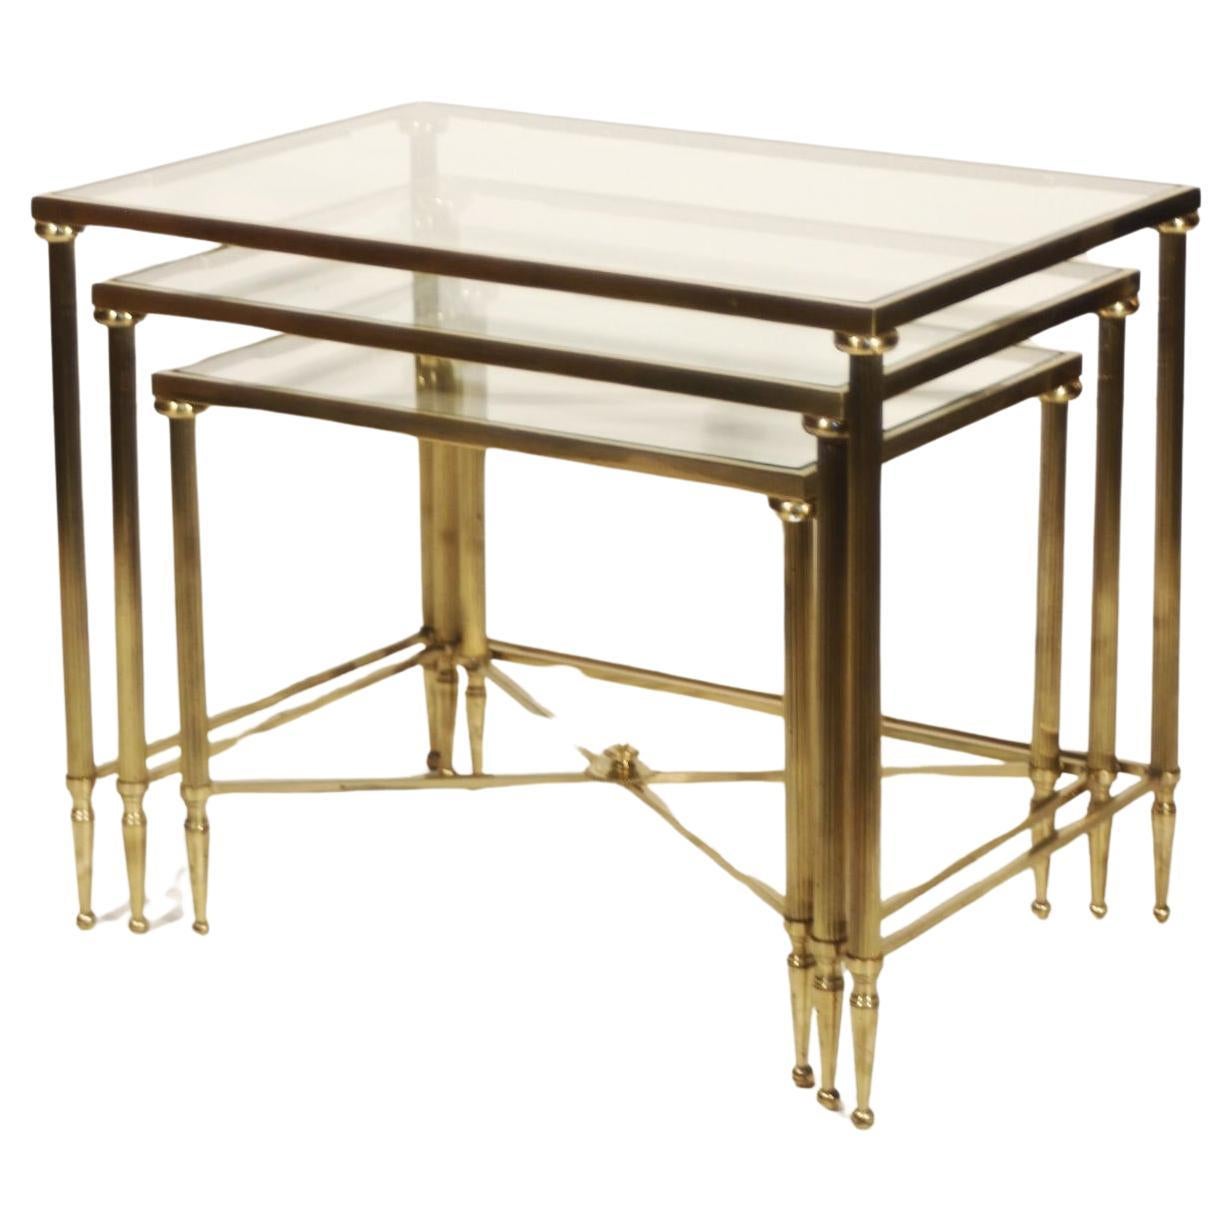 Who invented nesting tables?